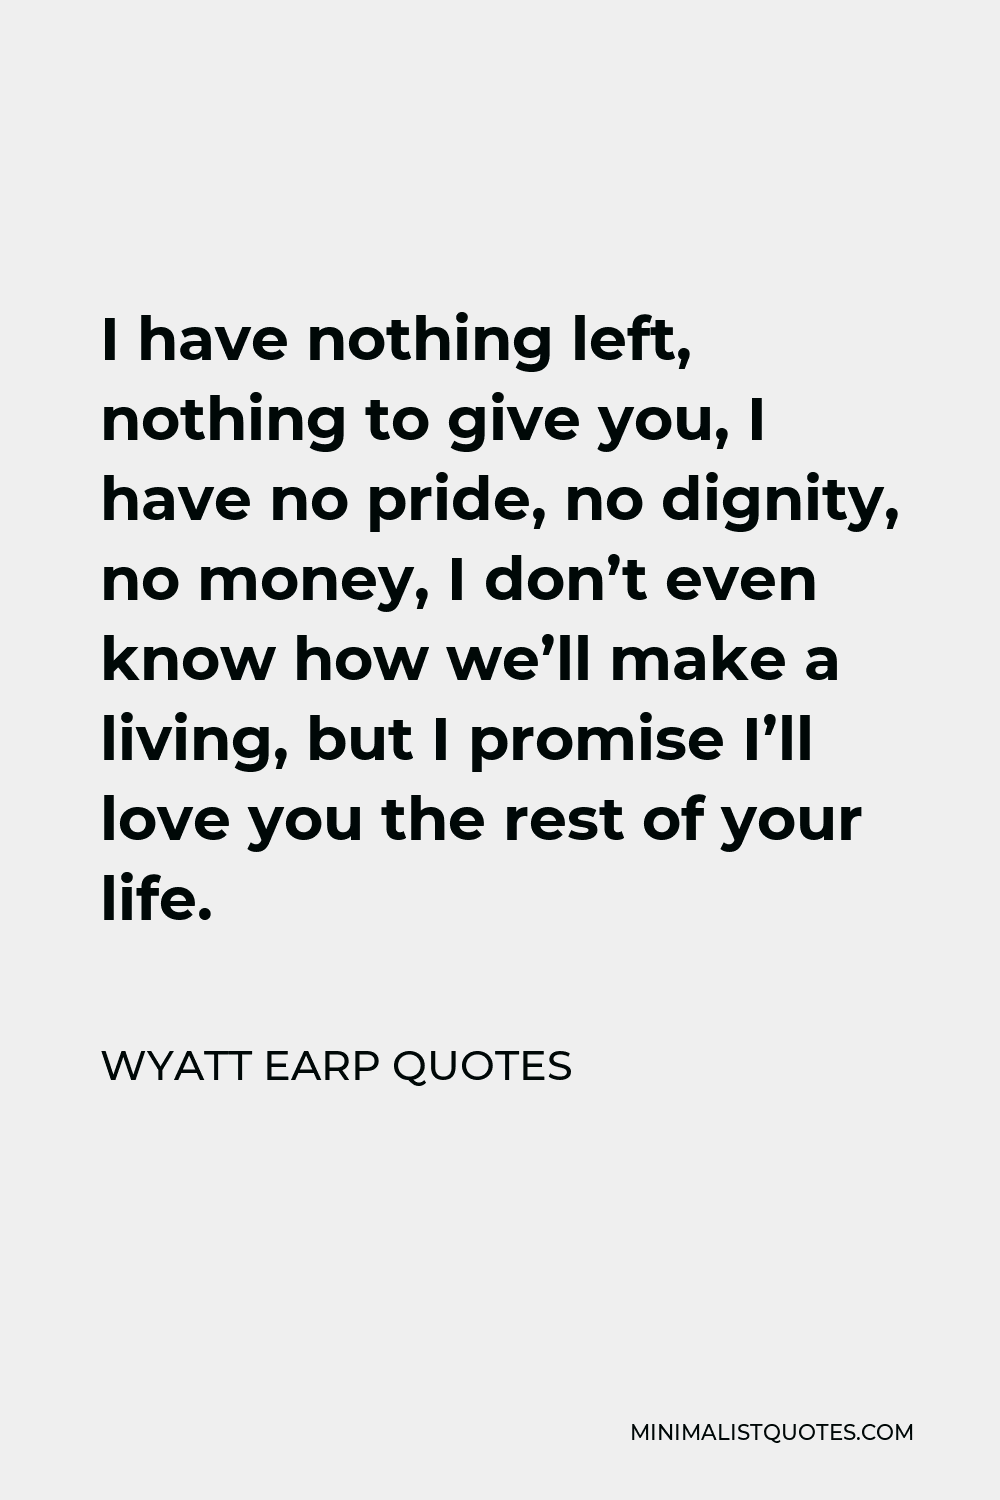 Wyatt Earp Quotes Quote - I have nothing left, nothing to give you, I have no pride, no dignity, no money, I don’t even know how we’ll make a living, but I promise I’ll love you the rest of your life.